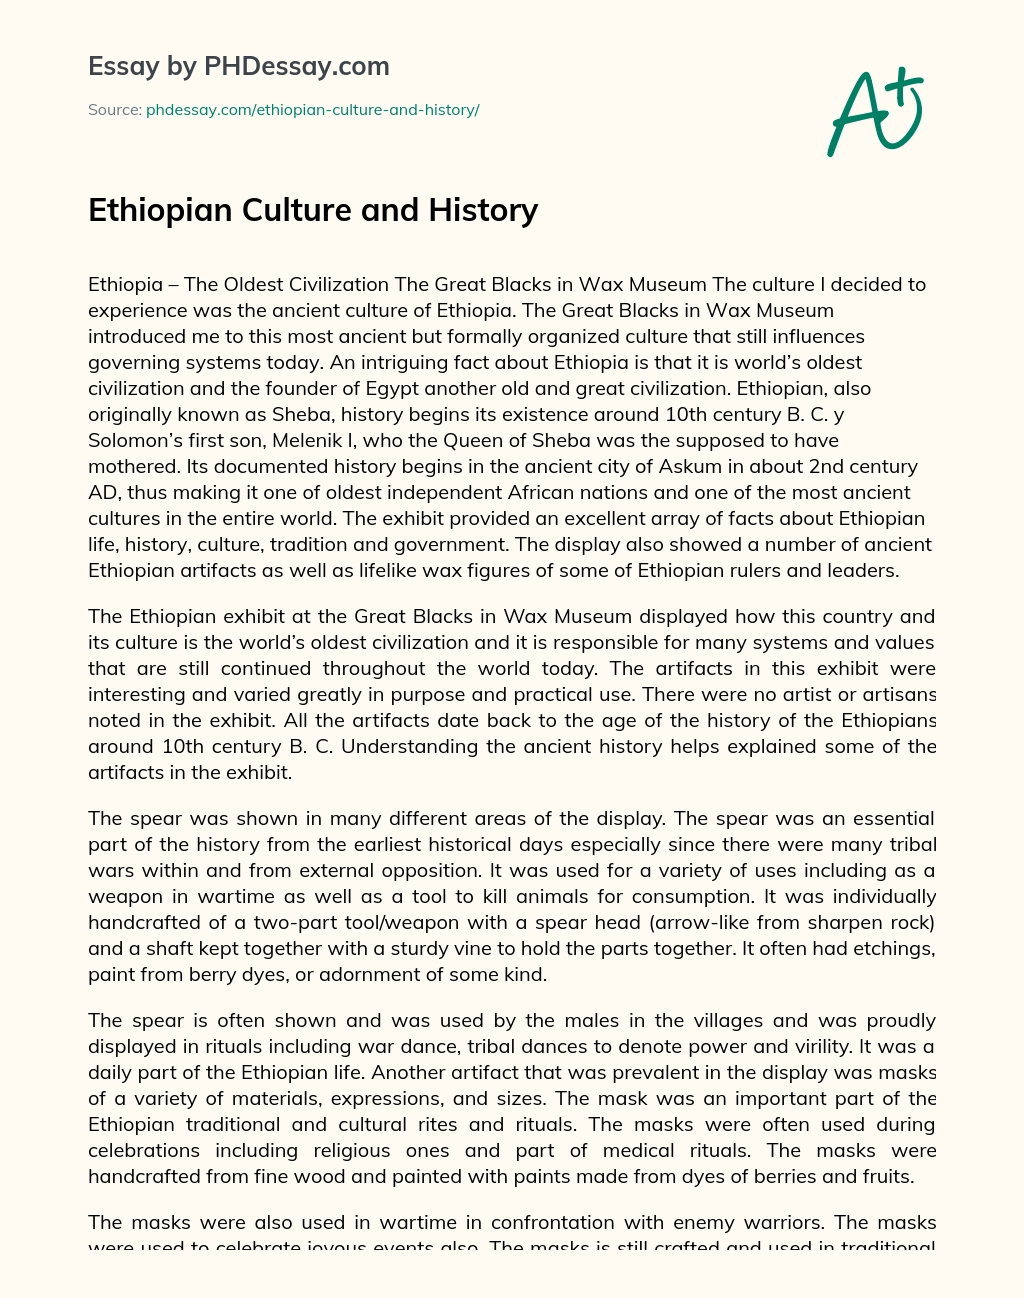 Ethiopian Culture and History essay